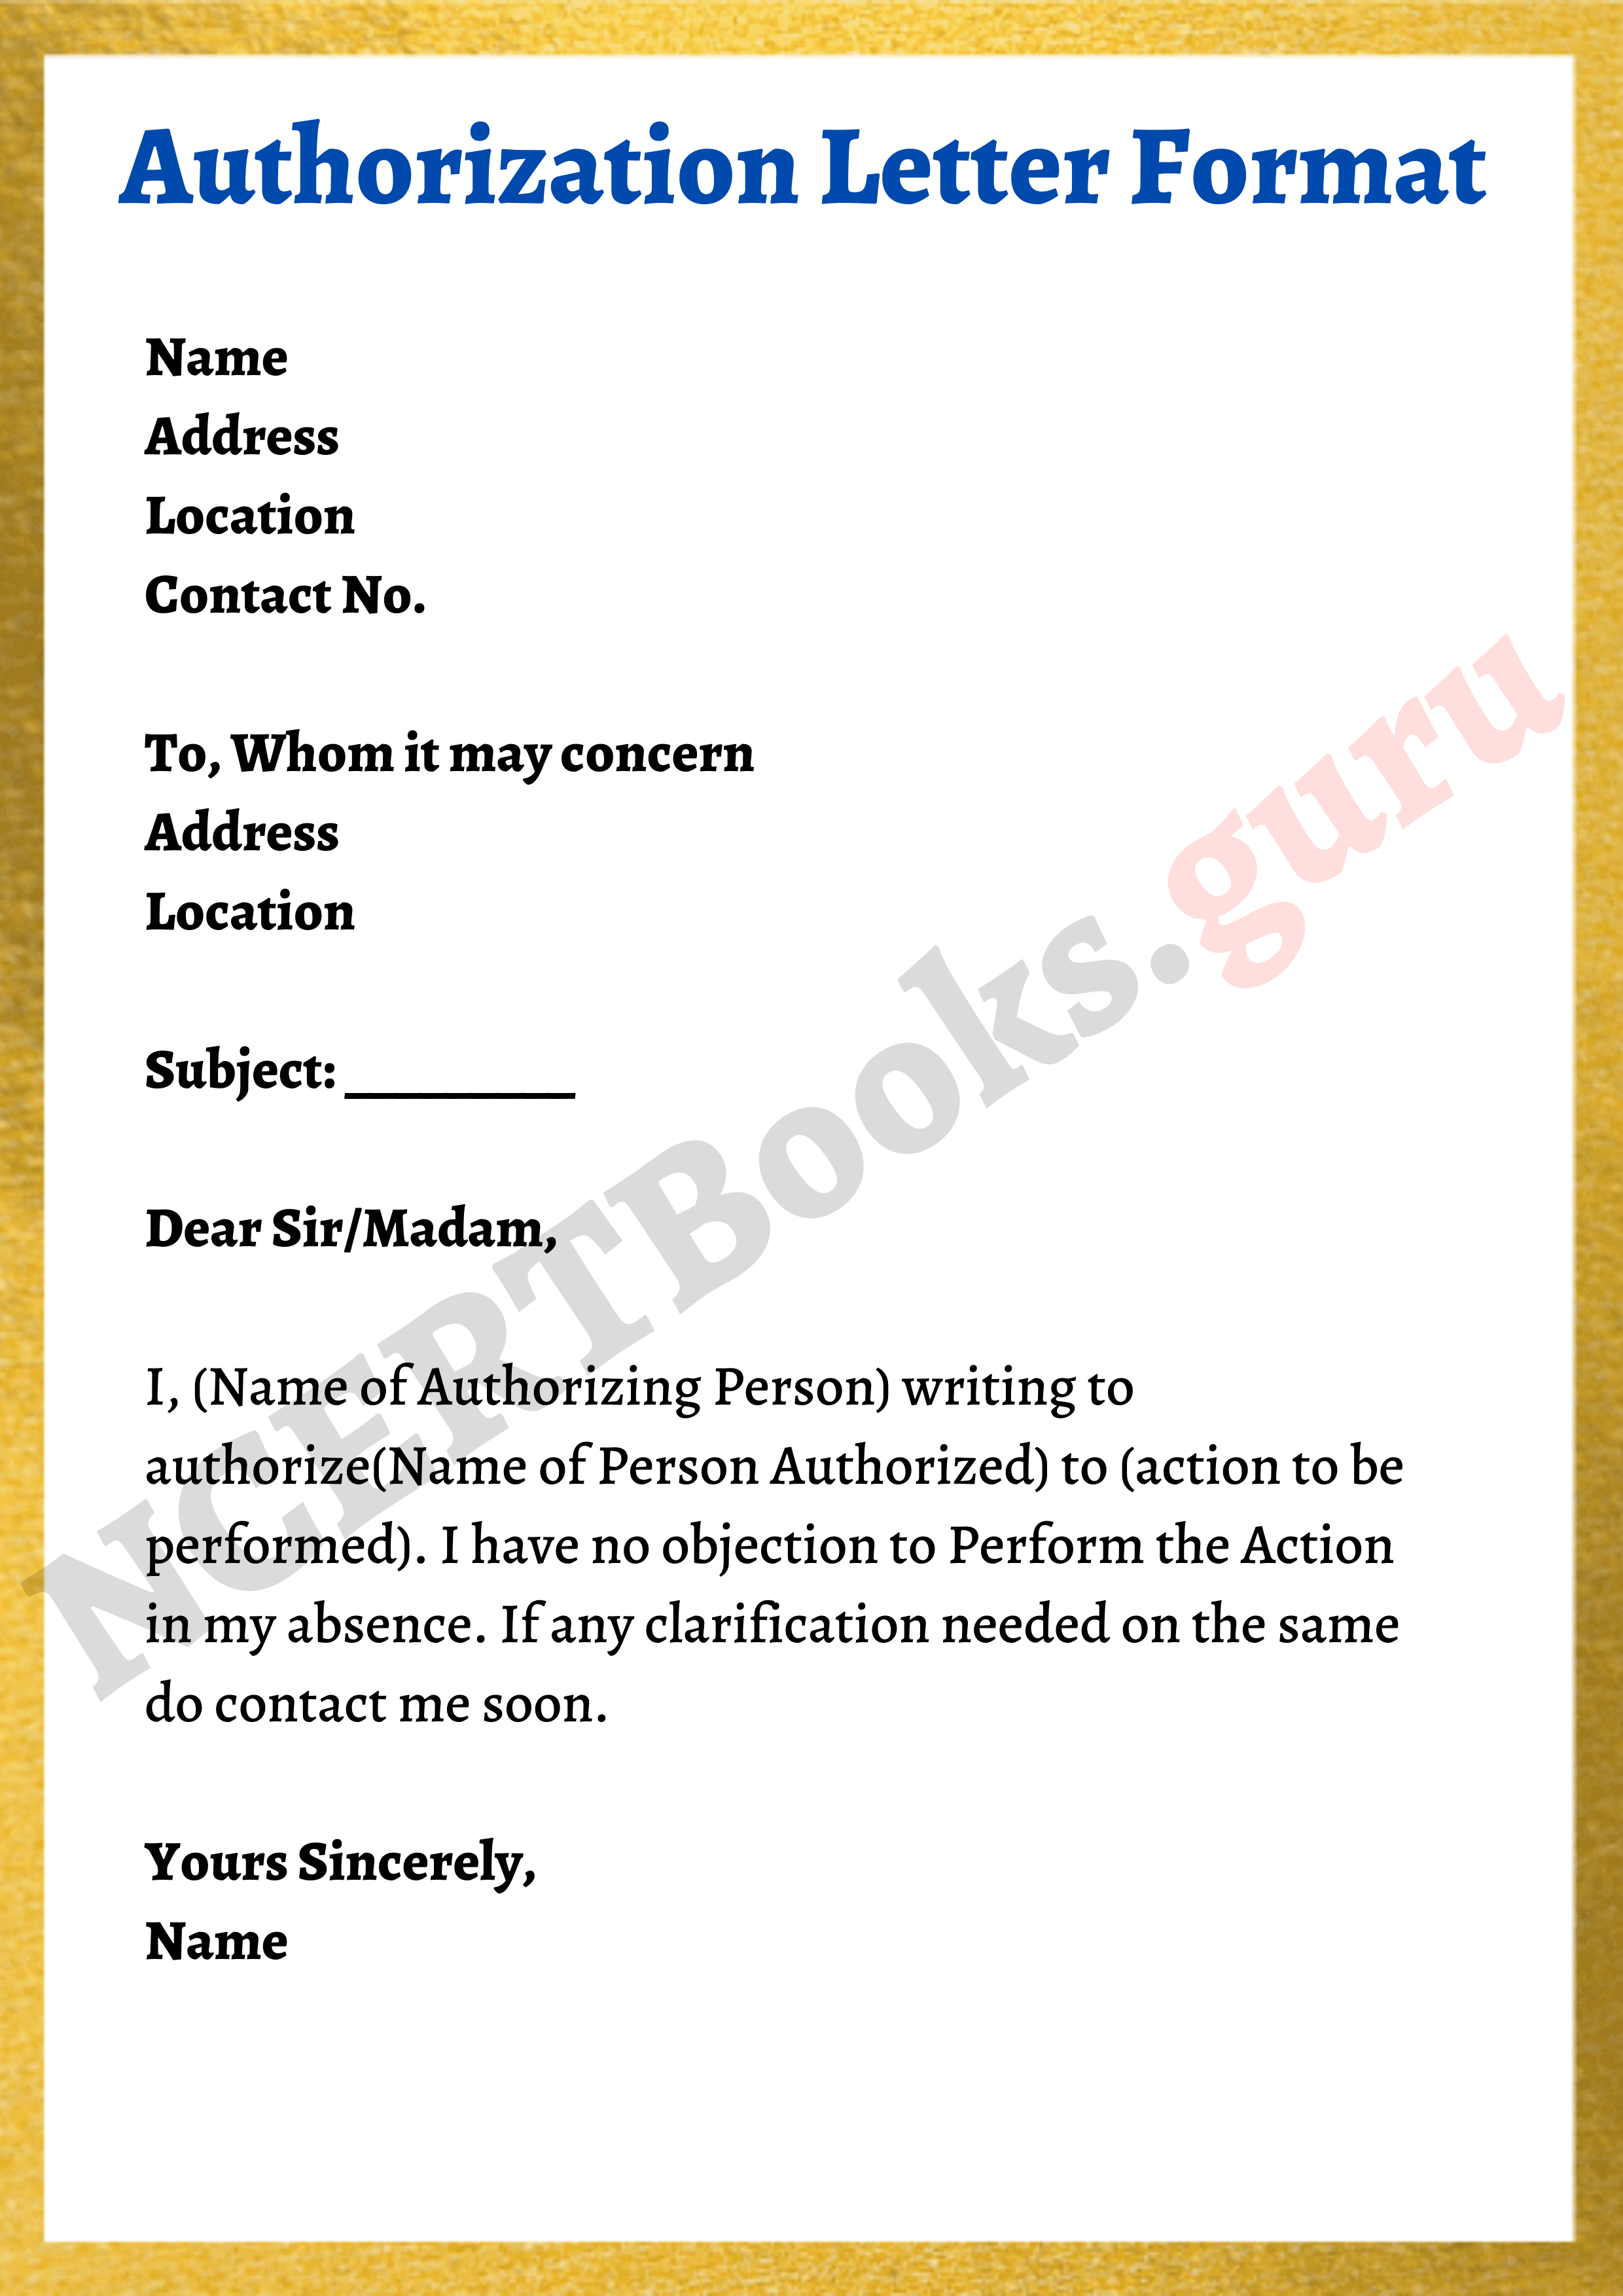 Letter of authorisation sample